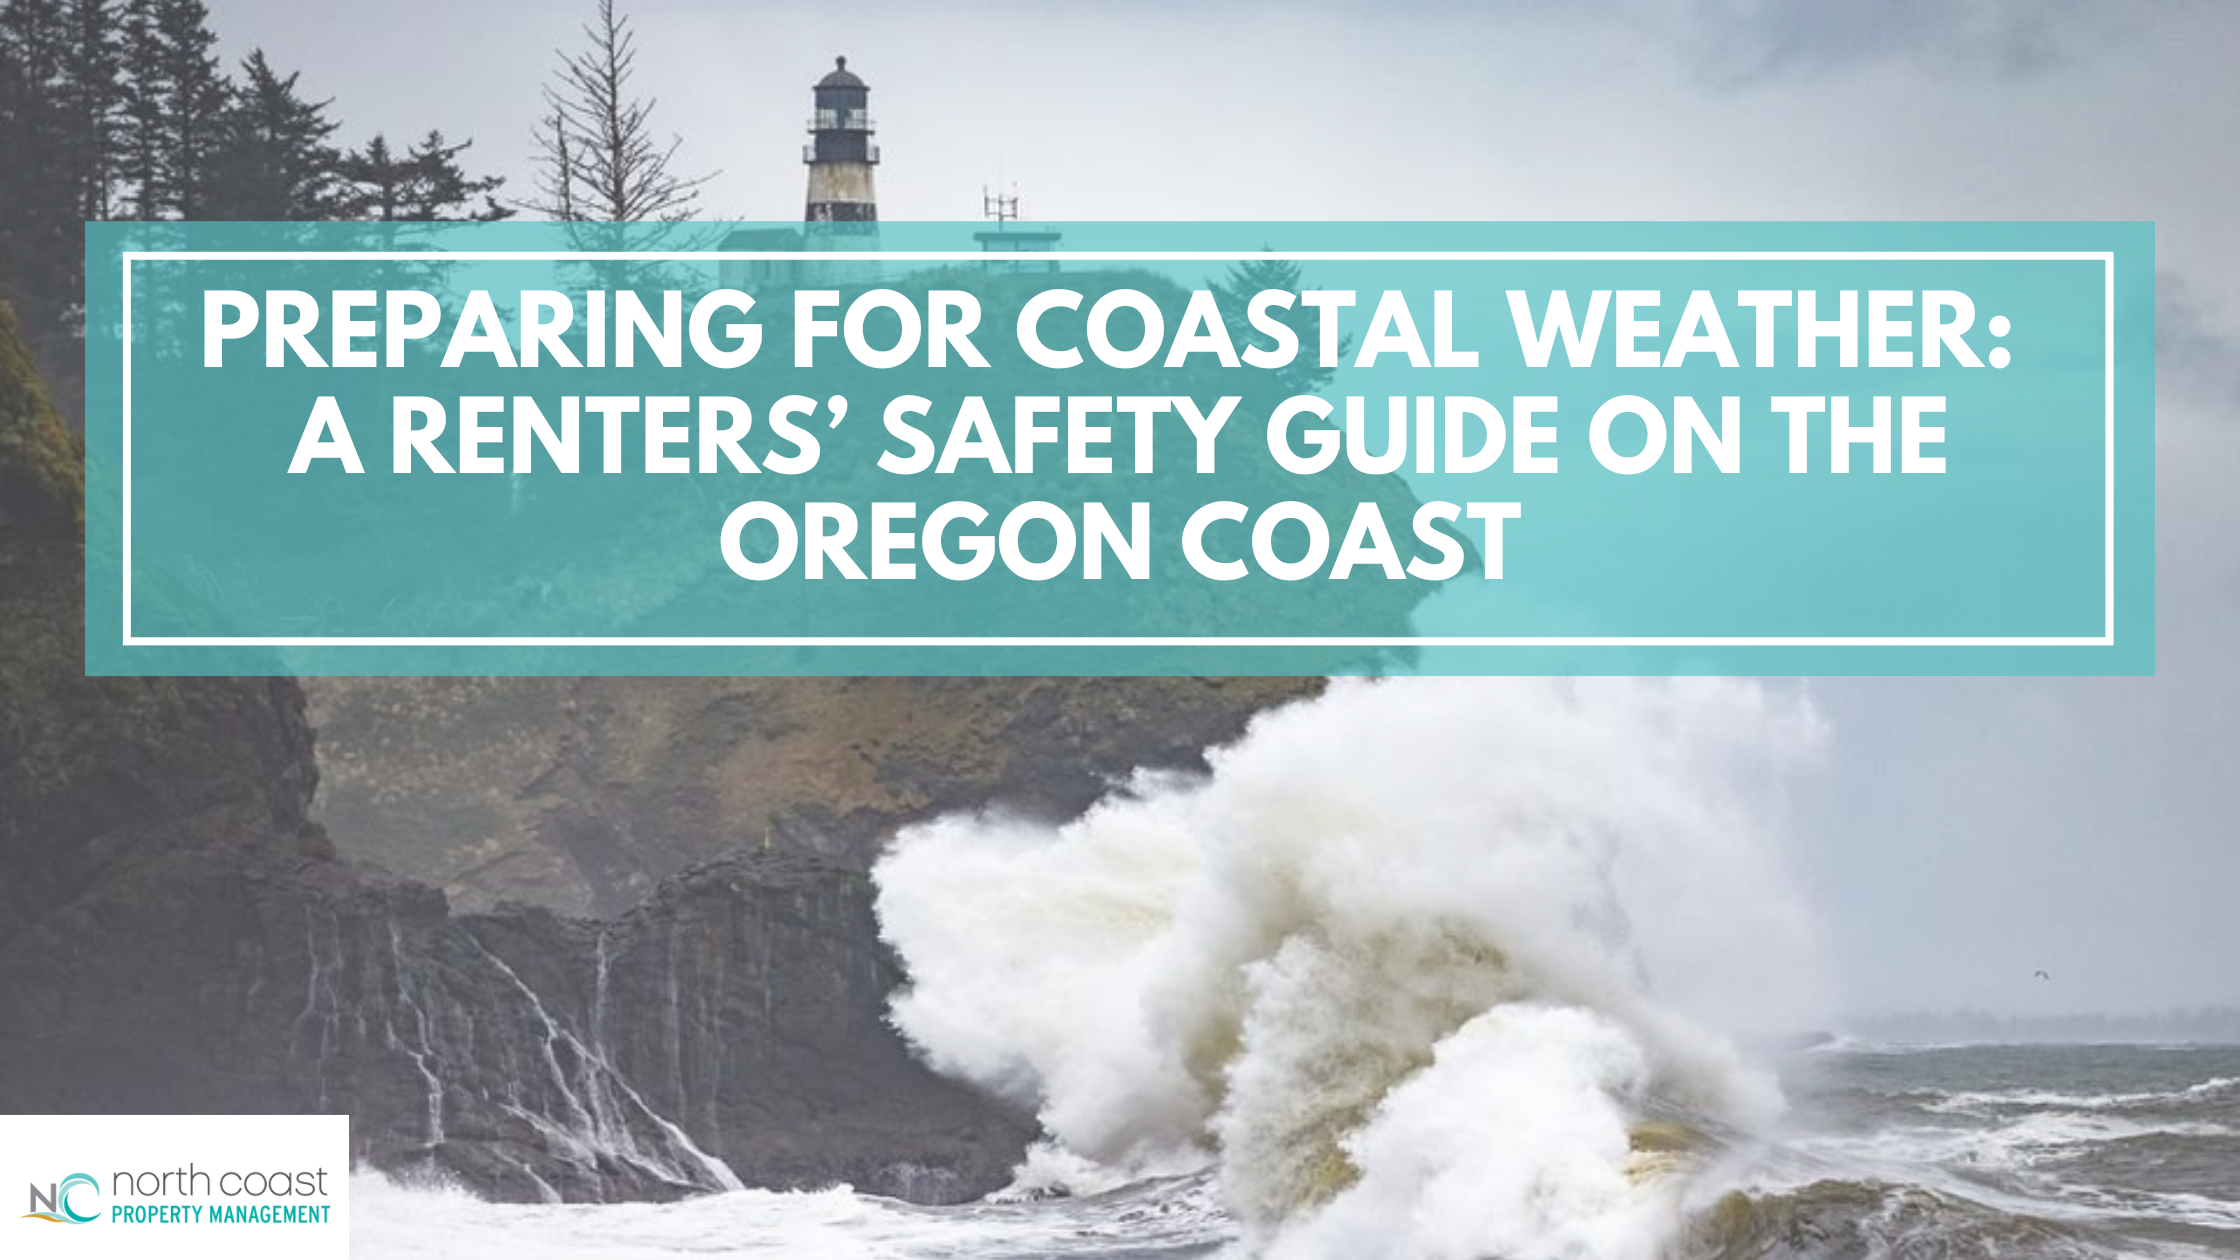 Preparing for Coastal Weather: A Renters’ Safety Guide on the Oregon Coast